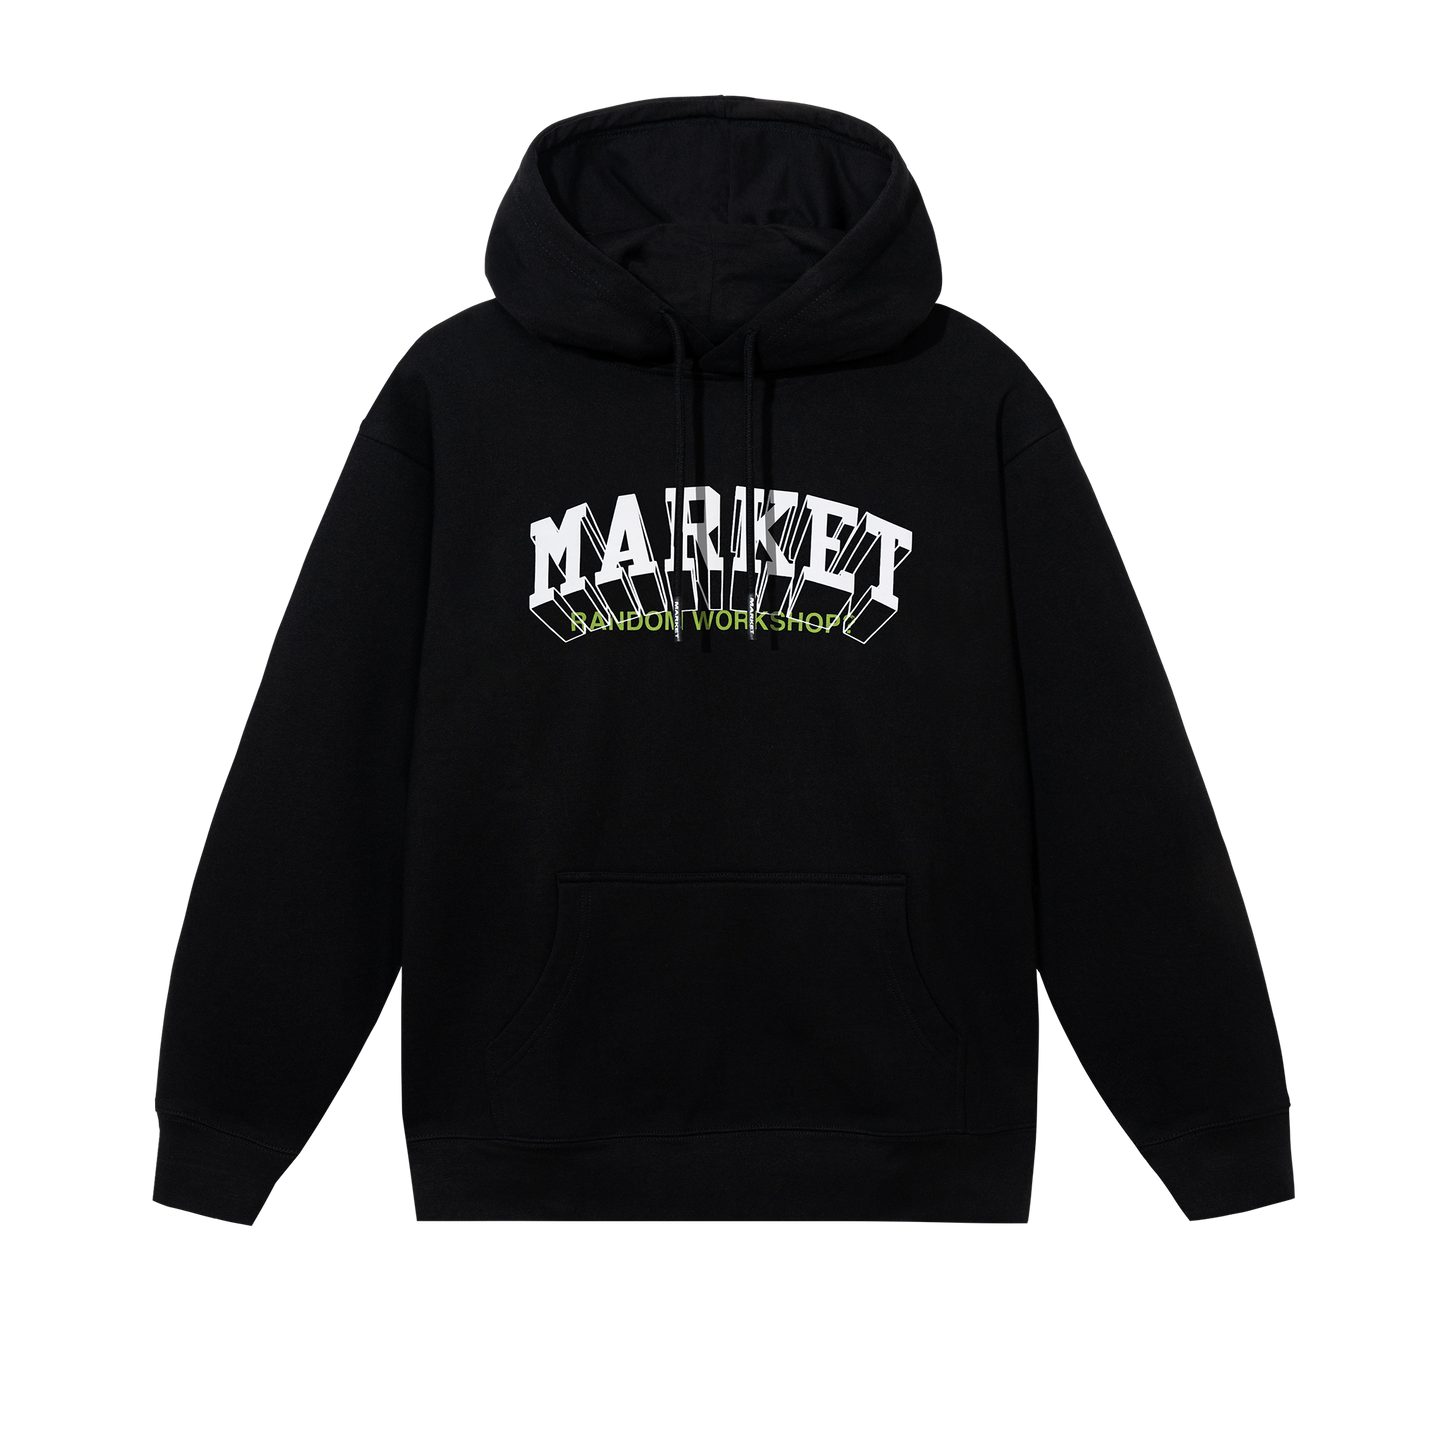 MARKET clothing brand SUPER MARKET PULLOVER HOODIE. Find more graphic tees, hats and more at MarketStudios.com. Formally Chinatown Market.